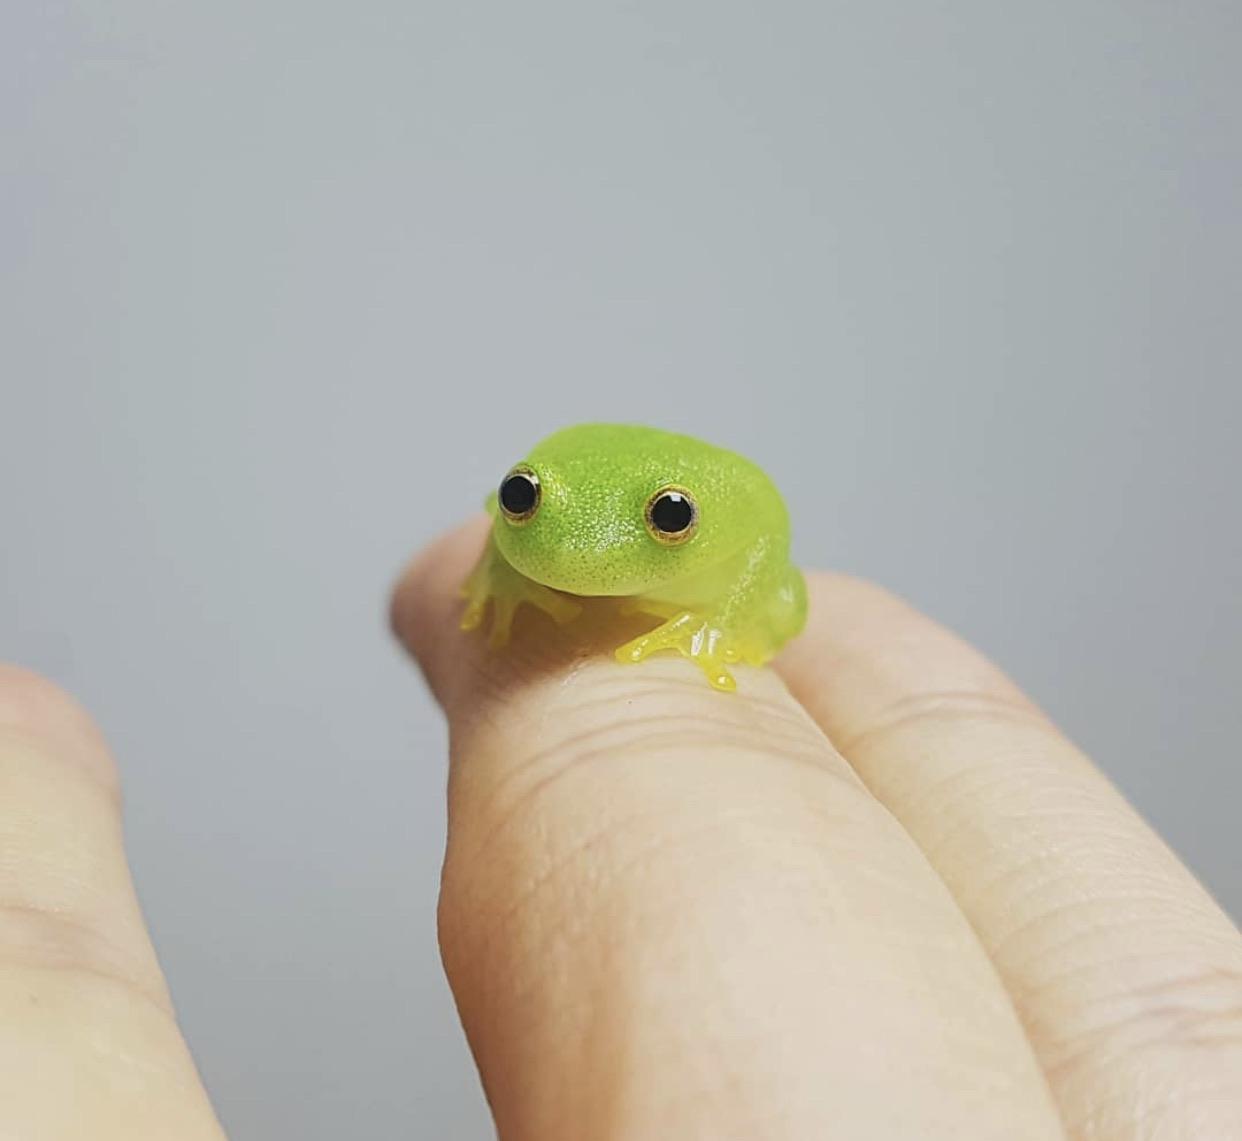 cool pics and funny memes - small frog on finger